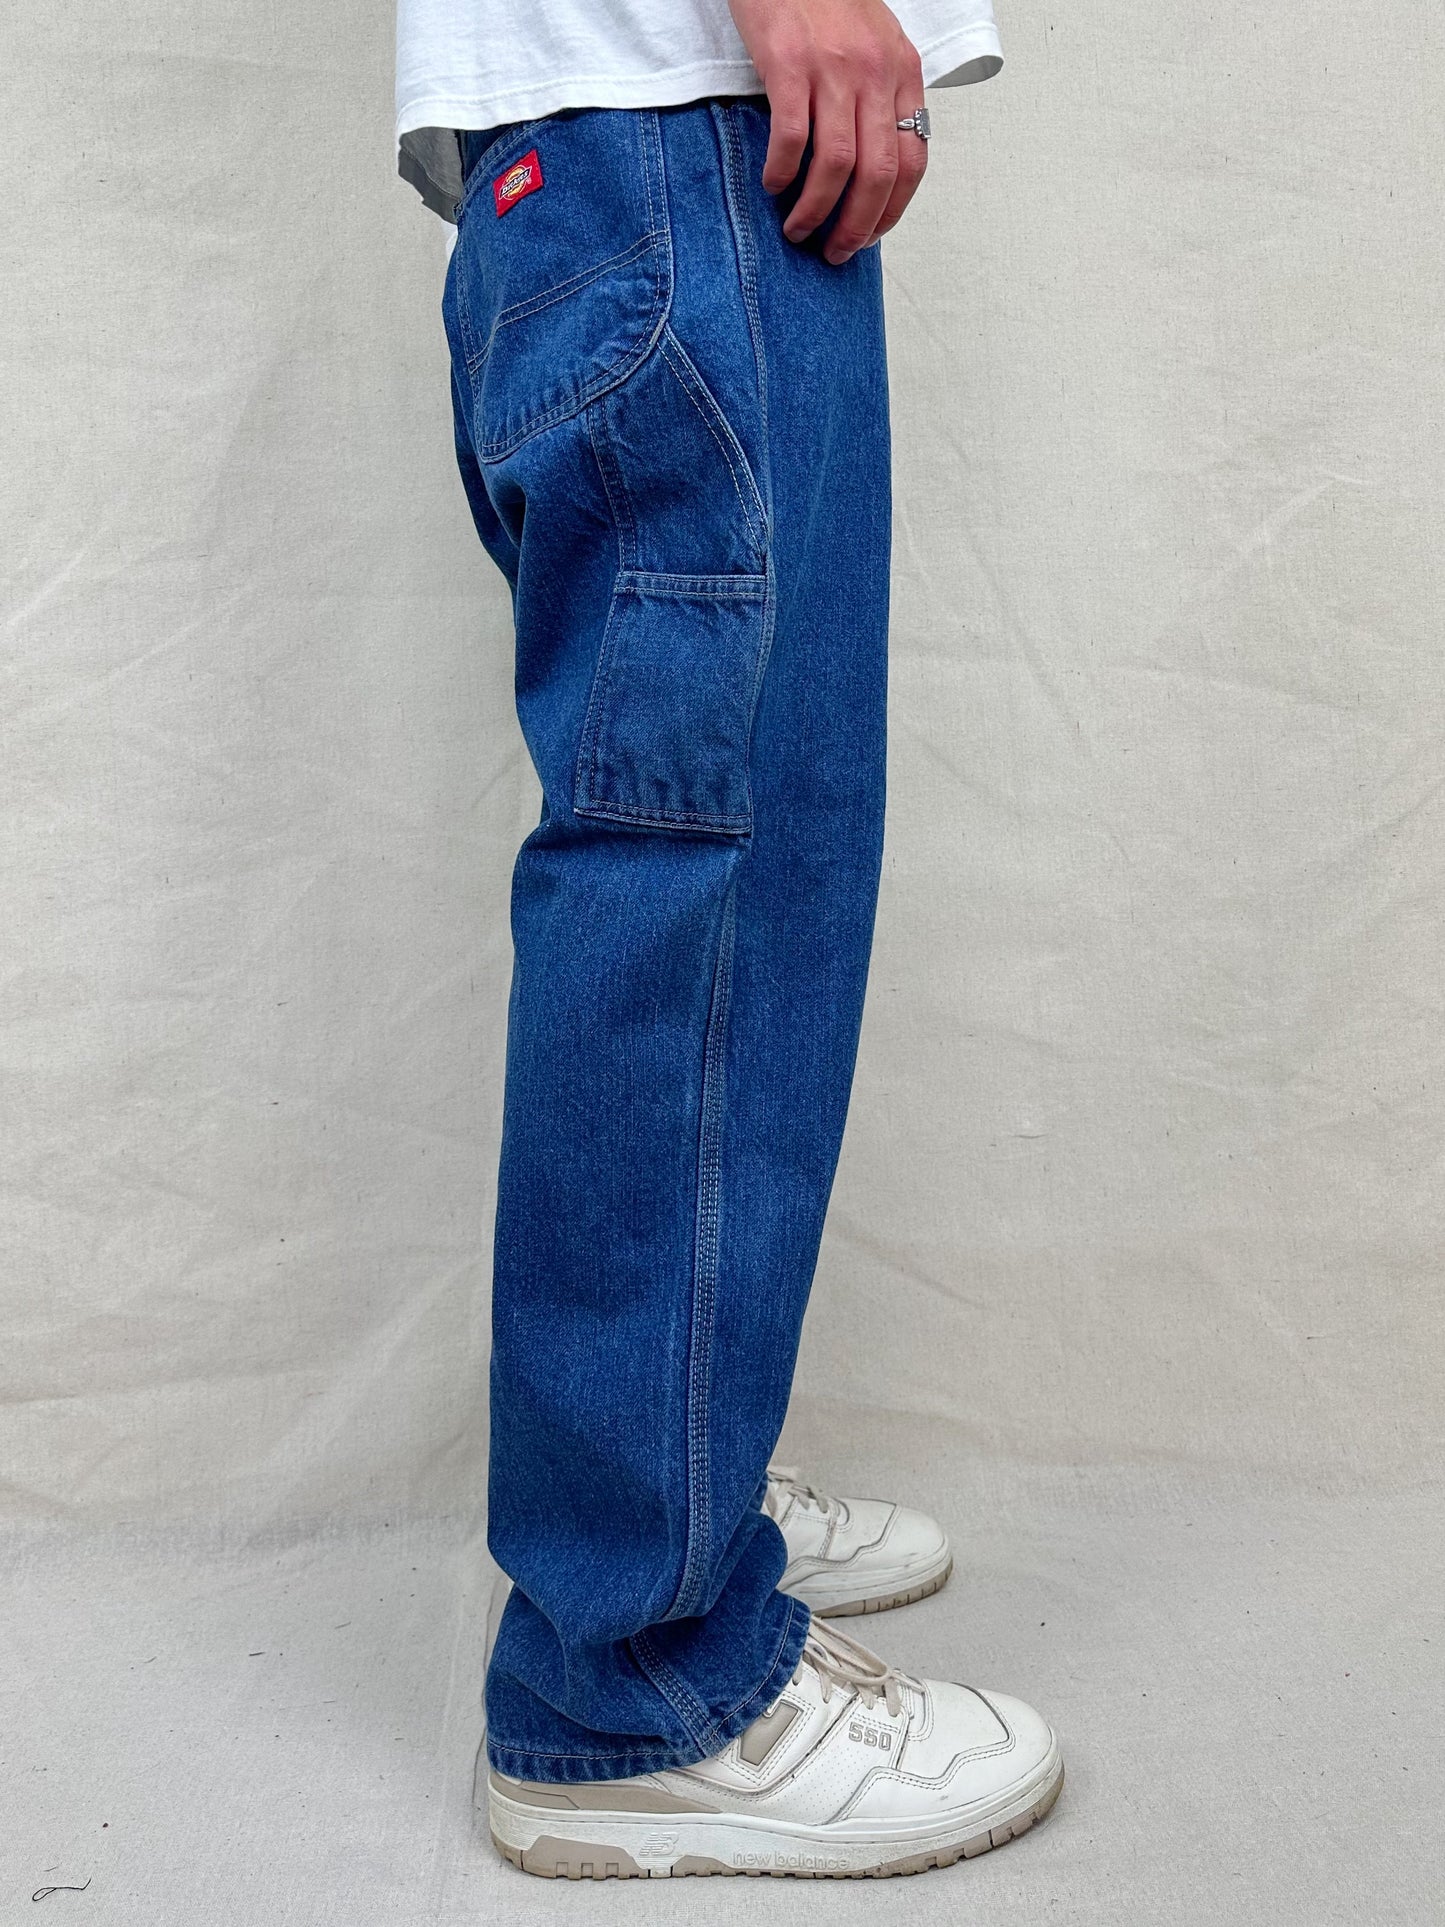 90's Dickies Heavy Duty Vintage Carpenter Jeans Size 32x31